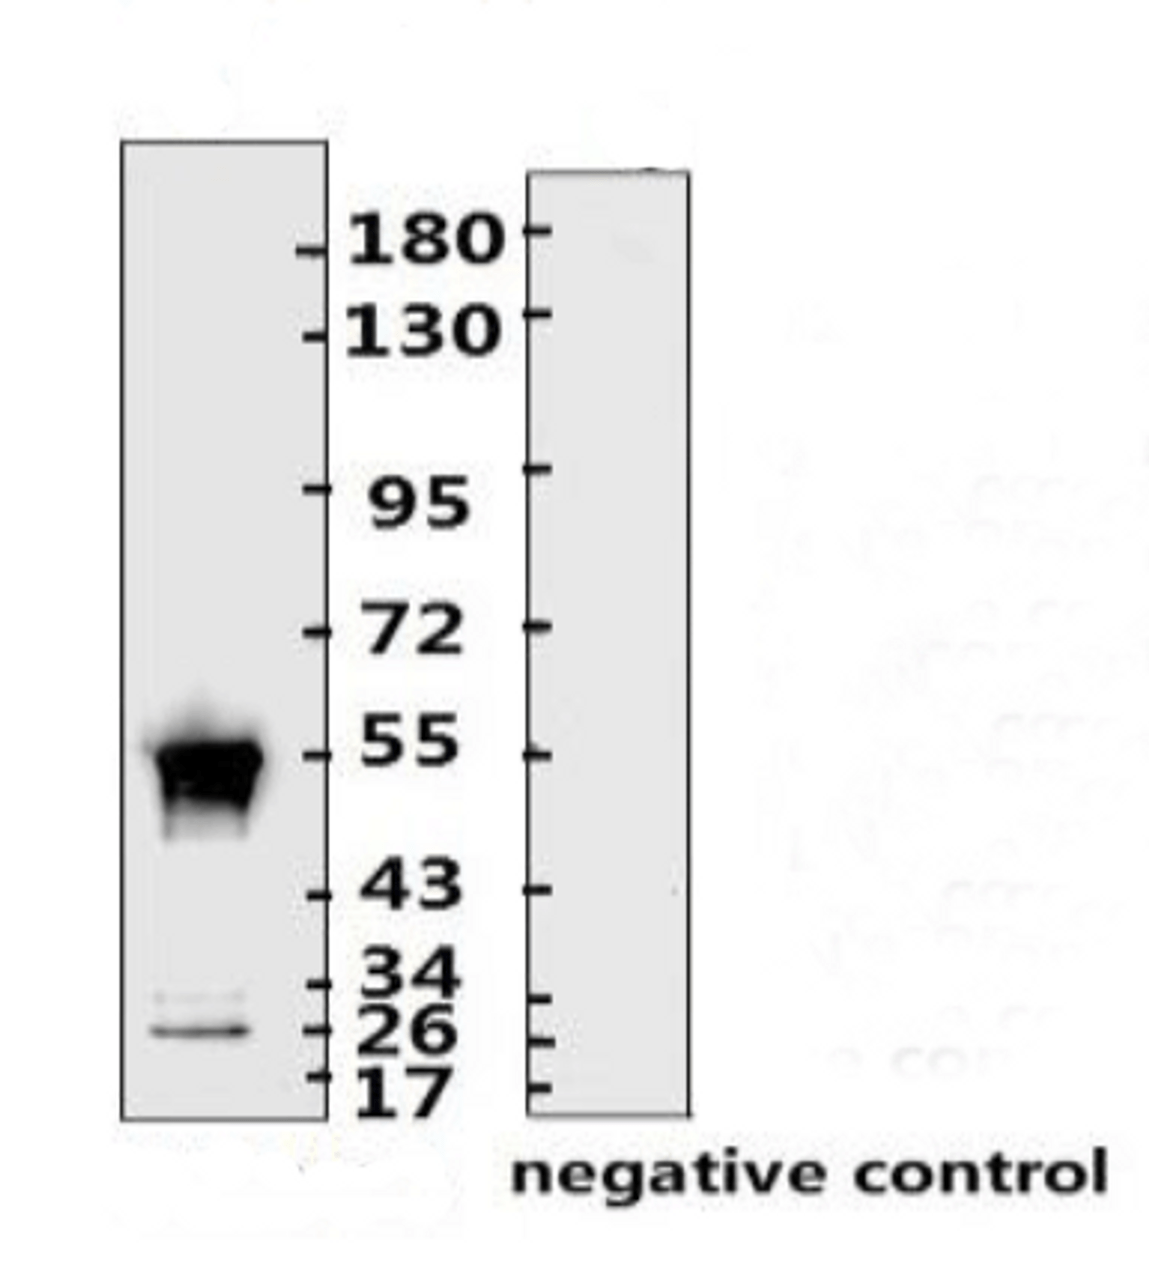 <strong>Figure 1 Western Blot Validation with Recombinant Protein</strong><br>Loading: 1ug of SARS-CoV-2 (COVID-19) nucleocapsid recombinant protein, 10-007, per lane. Antibodies: SARS-CoV-2 (COVID-19) Nucleocapsid Monoclonal Antibody, 10-542, 1:2000. Secondary: Goat anti-human IgG HRP conjugate at 1:5000 dilution.